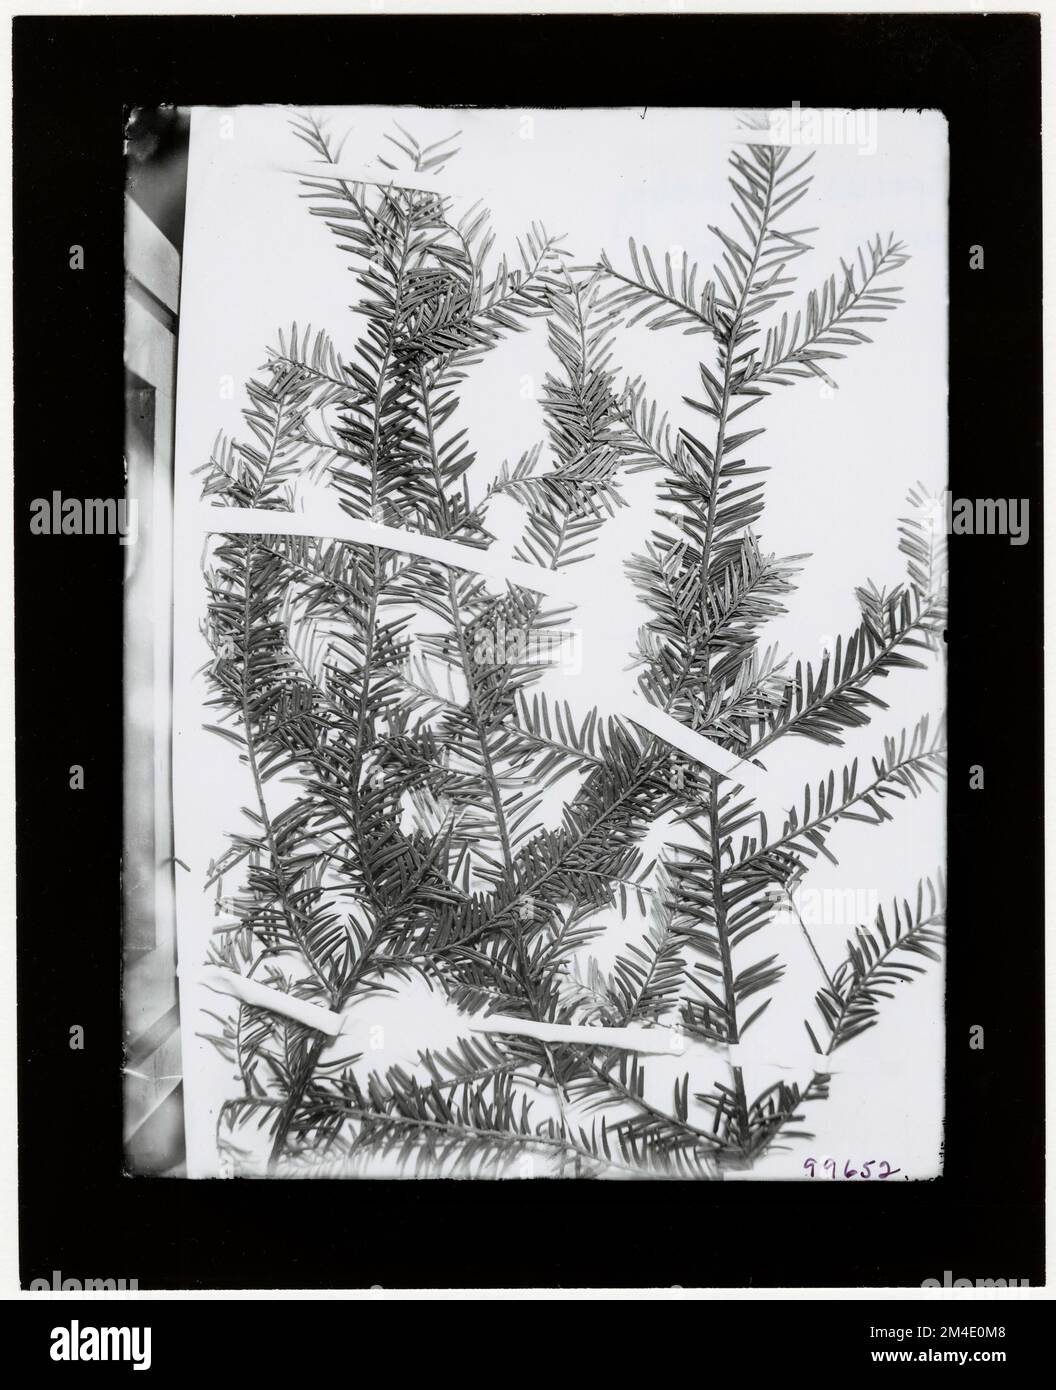 Tree Identification - Herbarium Specimen. Photographs Relating to National Forests, Resource Management Practices, Personnel, and Cultural and Economic History Stock Photo